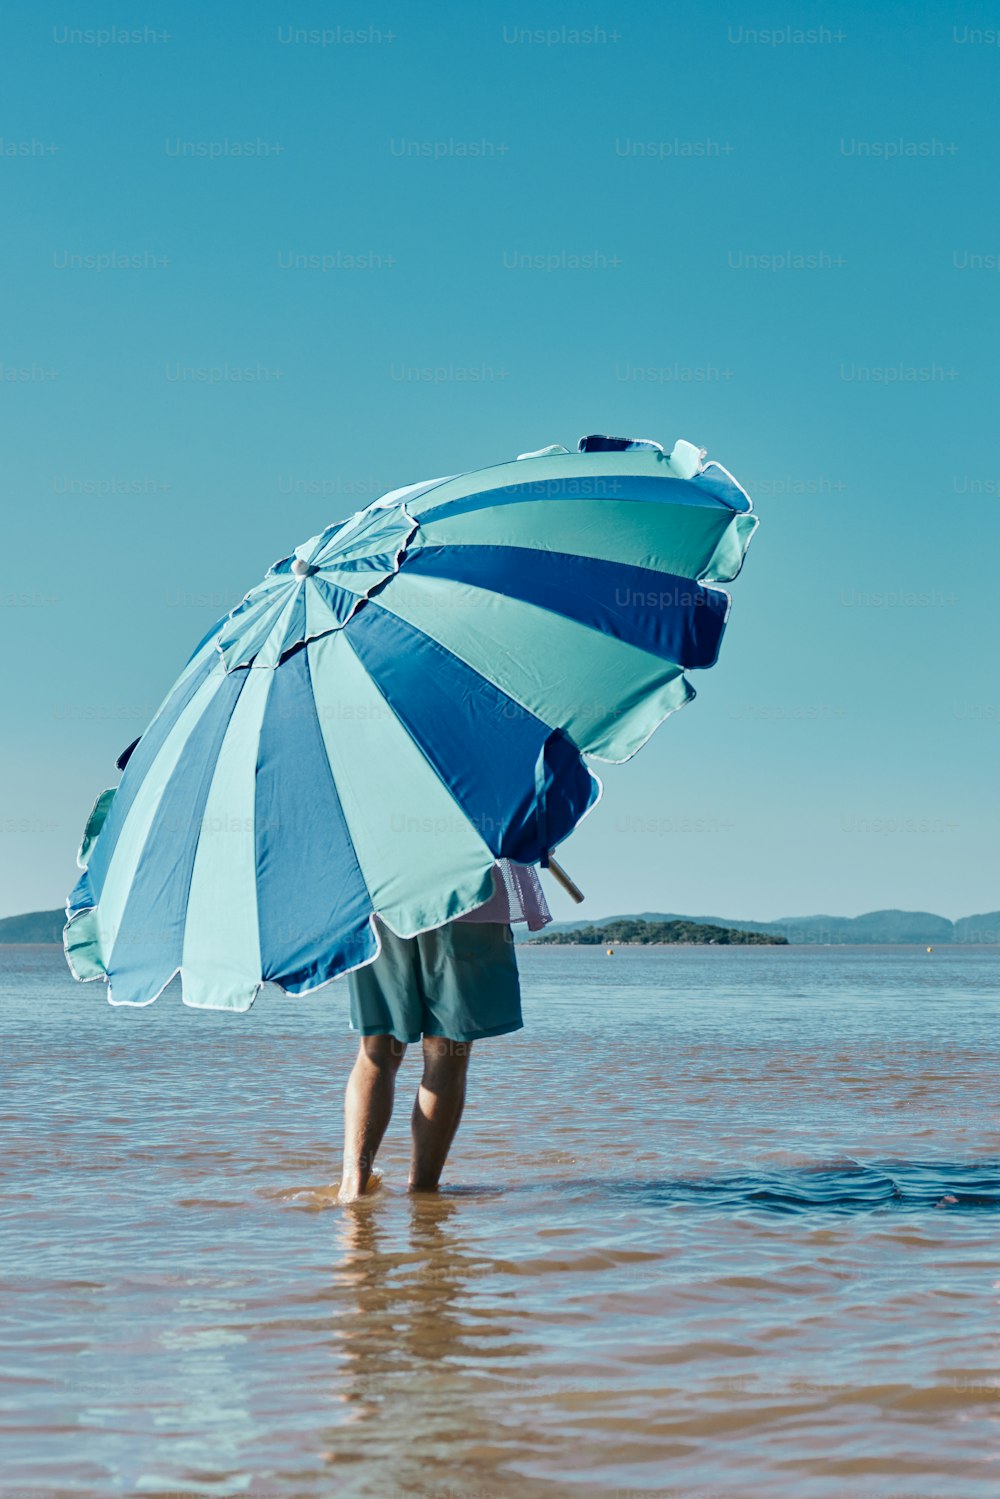 a person standing in the water with an umbrella